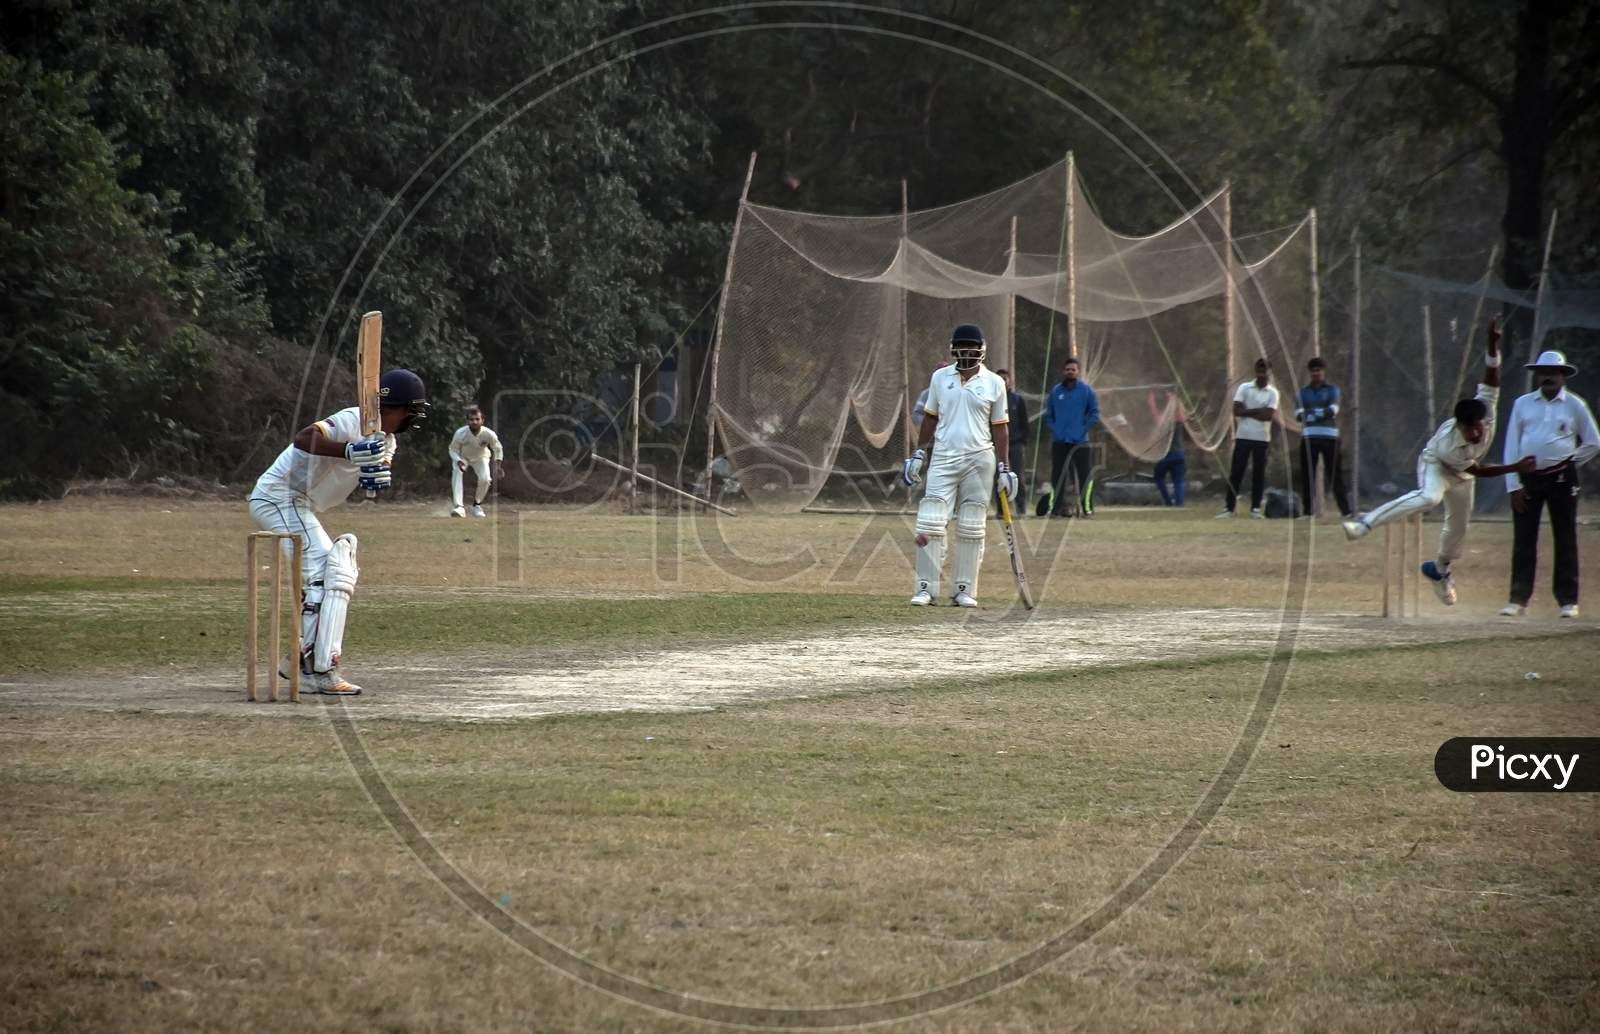 The bating and bowling action of a cricket ground.